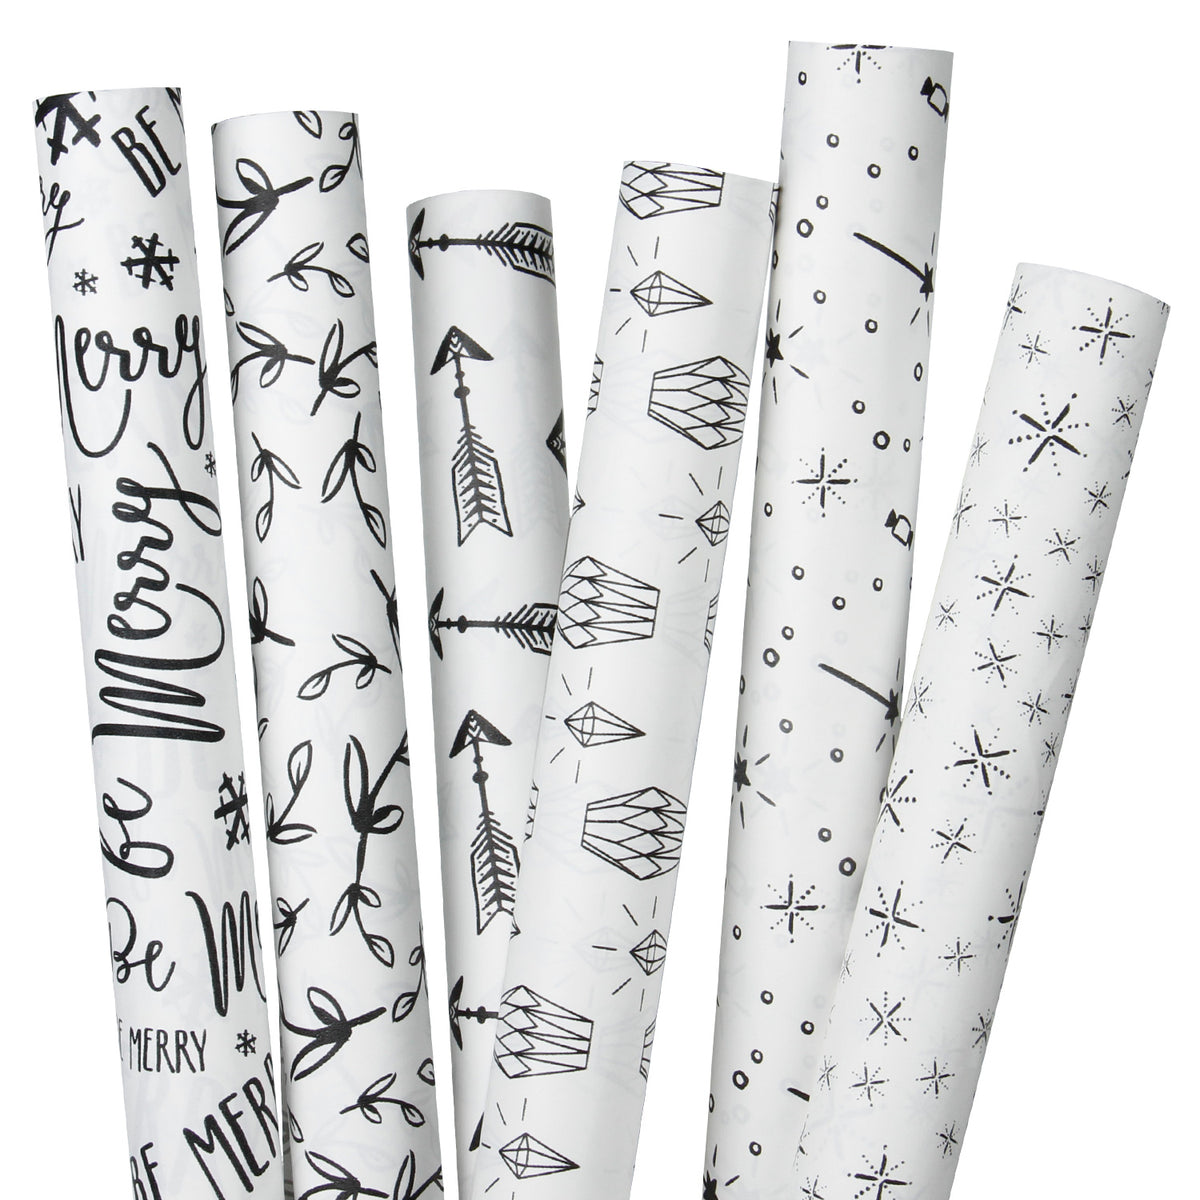 Wrapping Paper Roll, White 32.8' – WrapaholicGifts